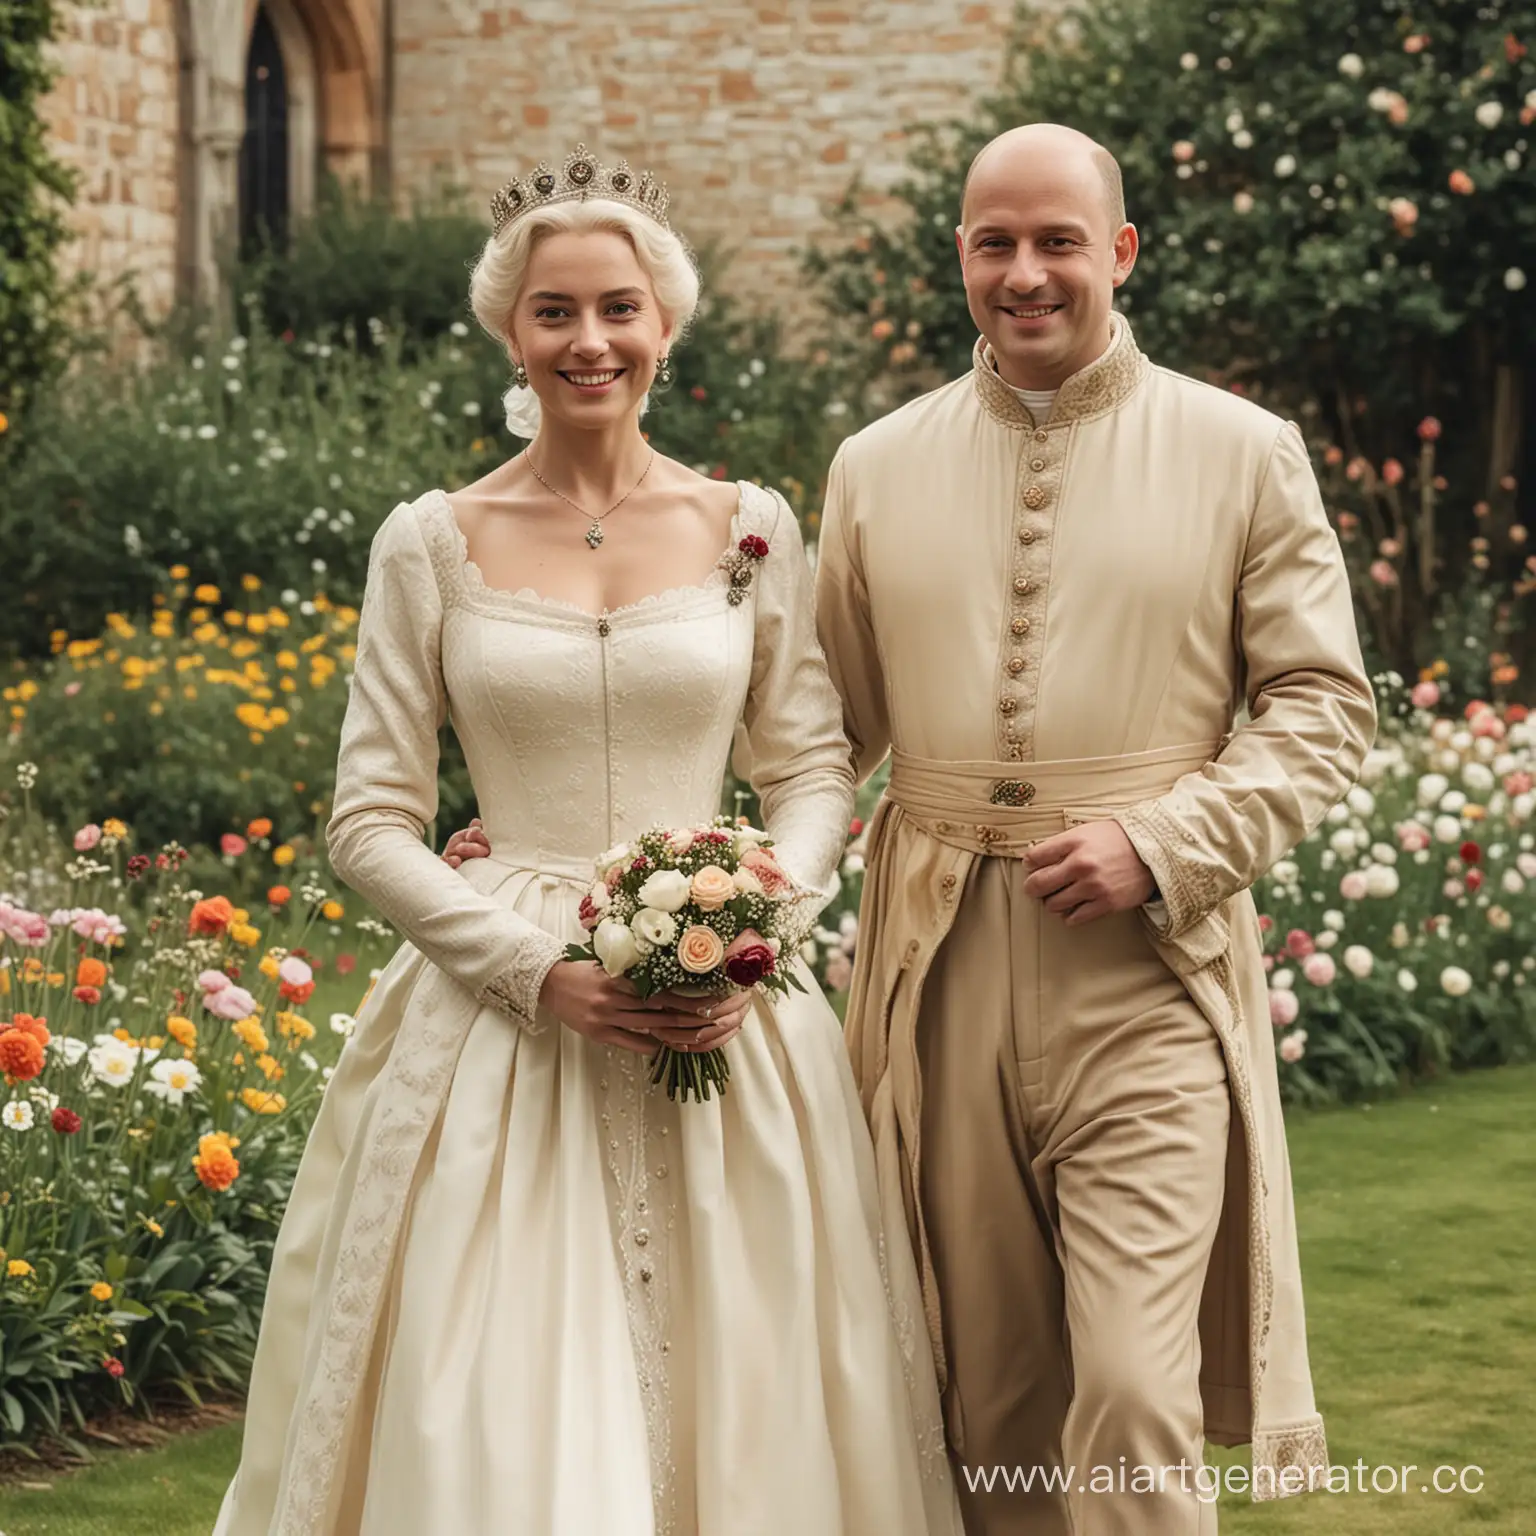 The Middle Ages, the king and the queen on a walk in the garden. The king puts his arm around his queen's waist, the queen has a small bouquet of flowers in her hands. The king and the queen look directly into the camera and smiling slightly. The king is bald